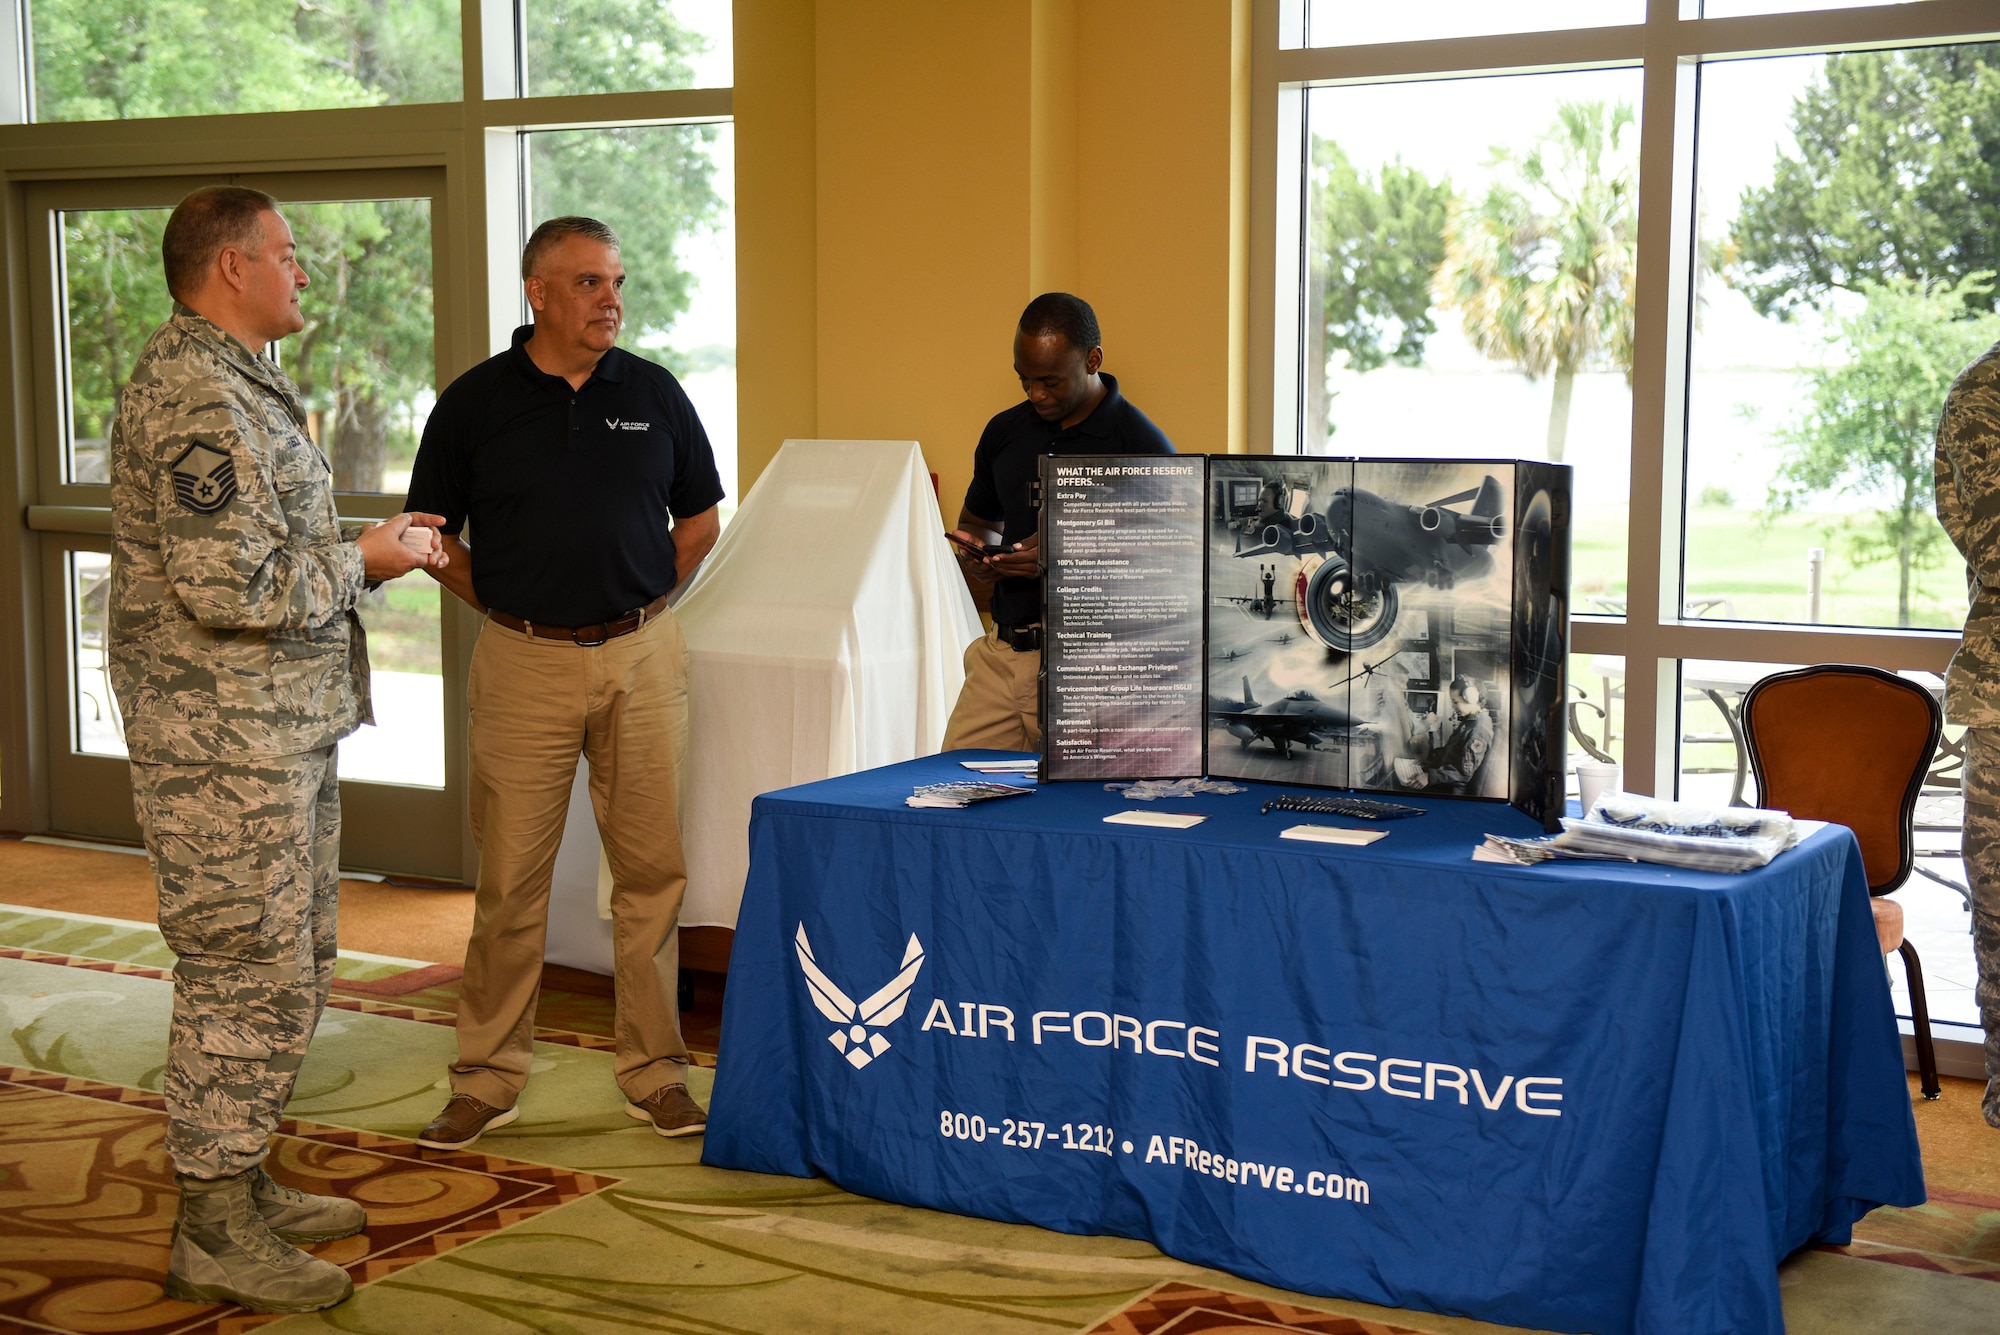 Master Sgts. John Fusco, left, and Michael Perkins, in-service recruiters assigned to the 1st Special Operations Force Support Squadron, wait to meet with potential candidates during the 2017 Career Symposium at the Soundside Club, Hurlburt Field, Fla., May 24, 2017. In-service recruiters provide Airmen separating from active duty with information on opportunities and benefits offered in the Air Force Reserves. (U.S. Air Force photo by Staff Sgt. Jeff Parkinson)